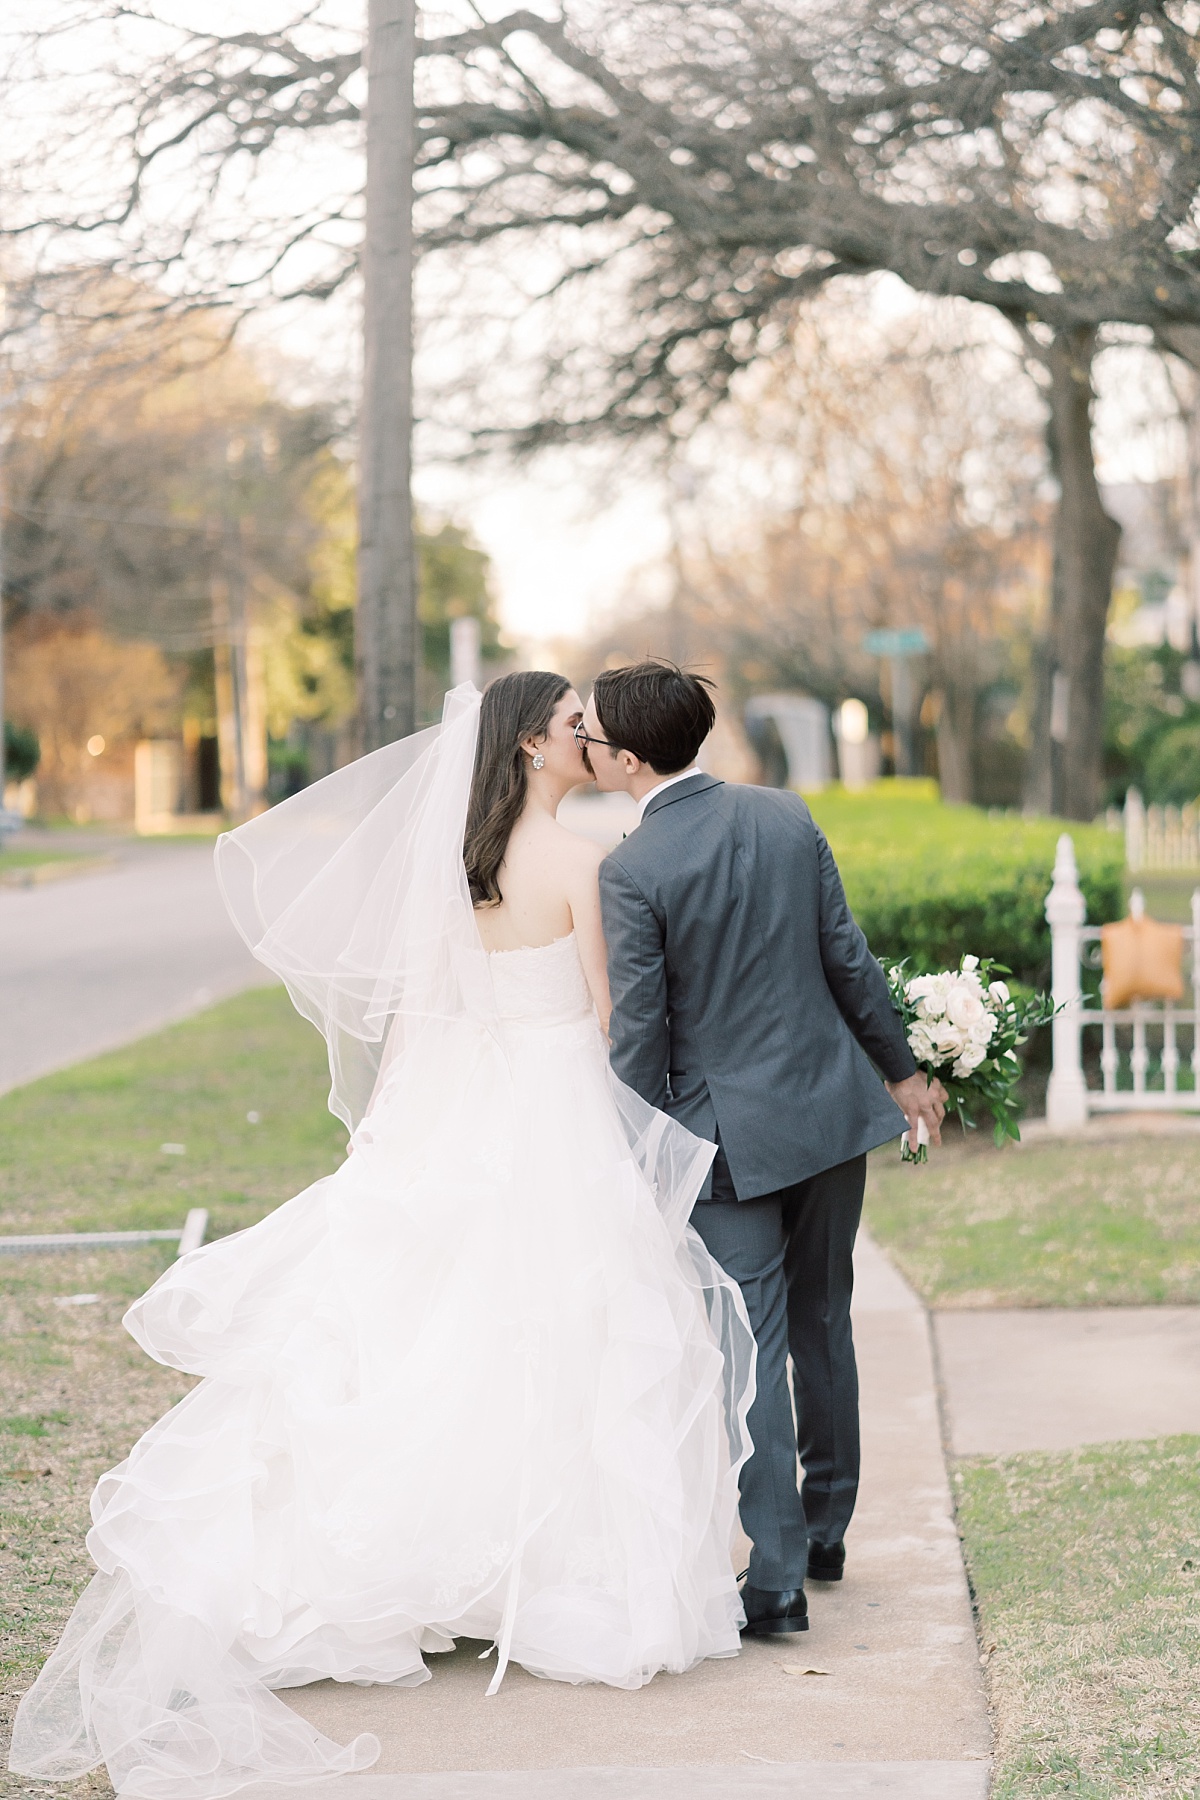 A bride and groom kiss while walking away from the camera on a quaint street in Austin, Texas while Paige Vaughn takes their wedding photos.